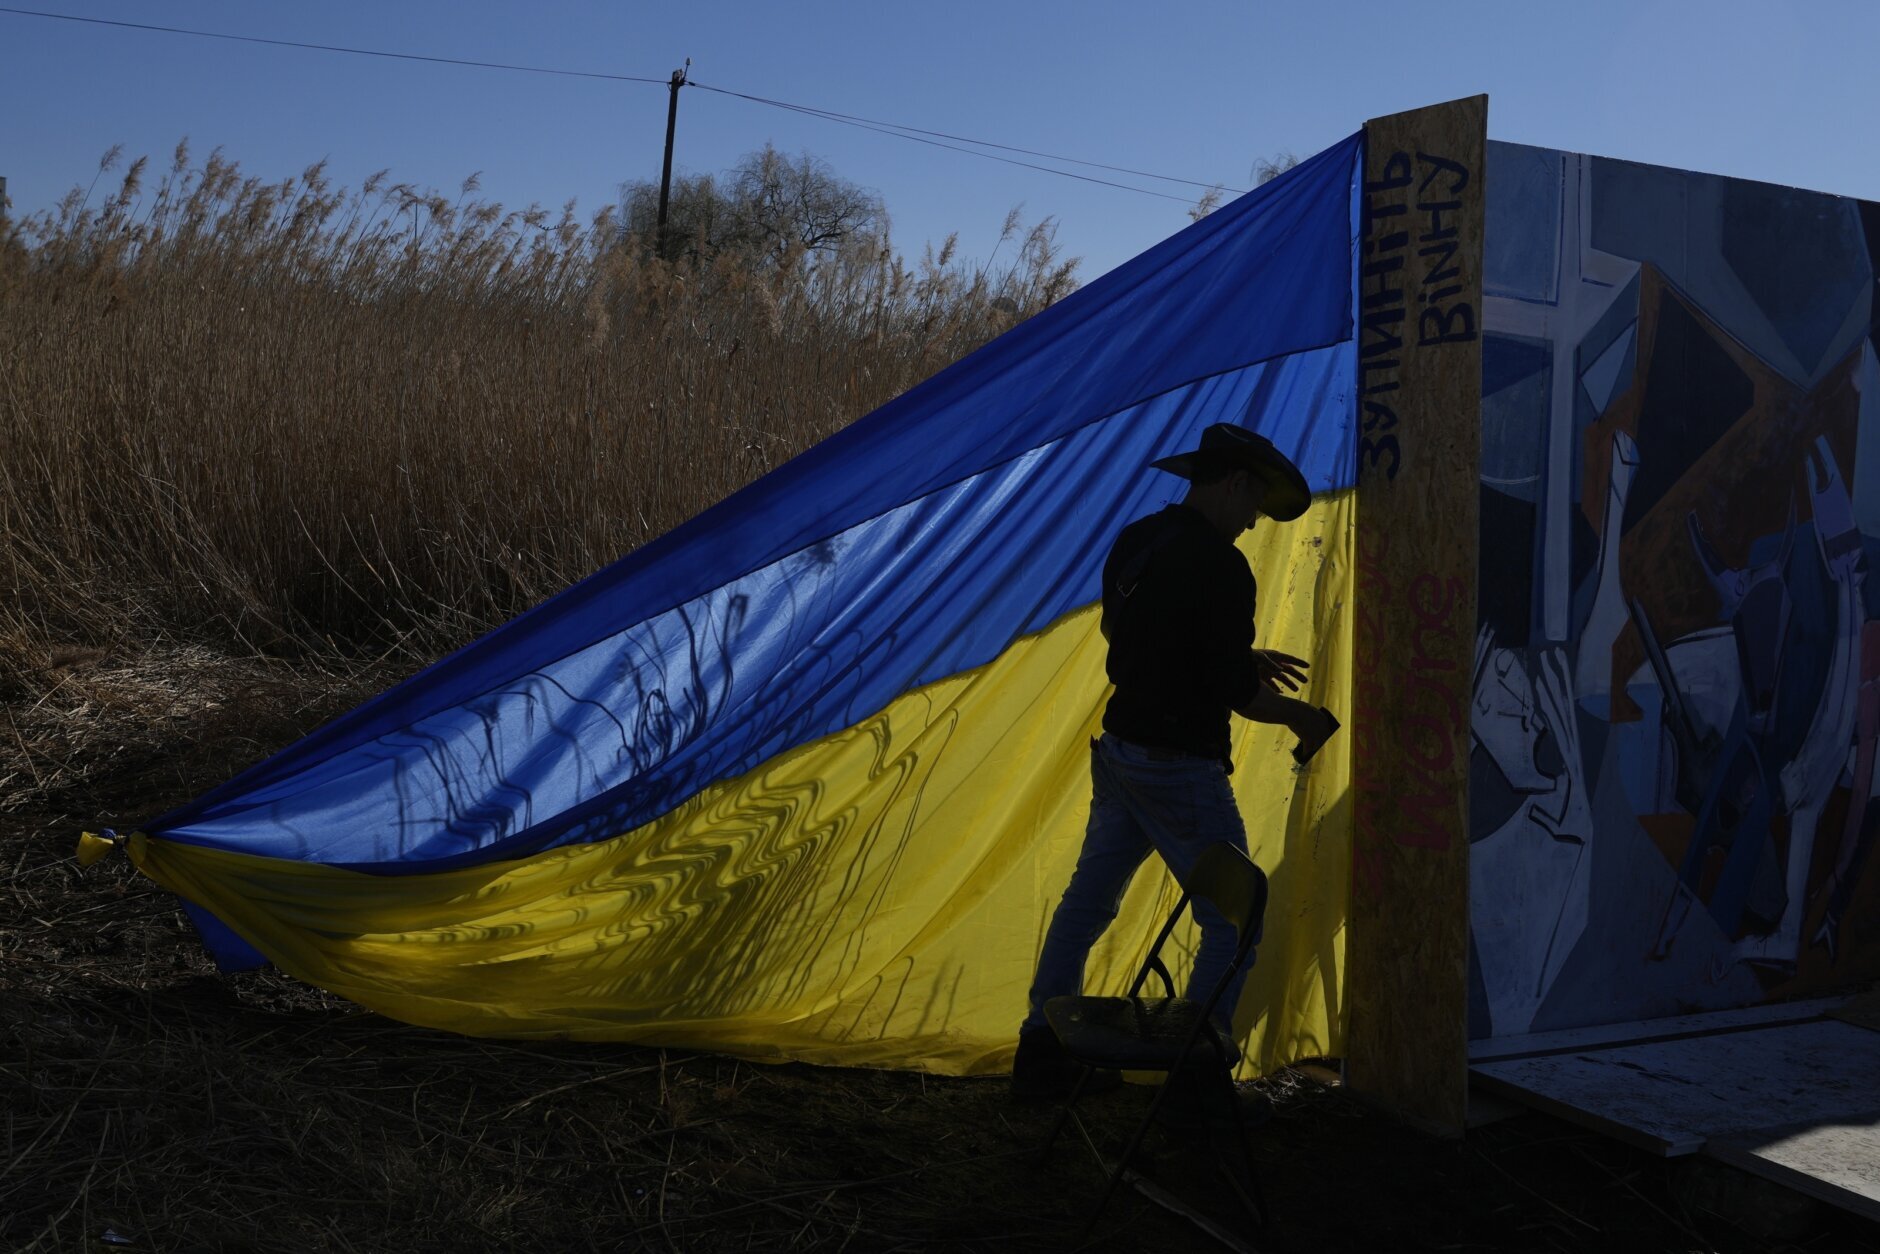 Roberto Marquez, a volunteer from Mexico, makes an installation with the Ukrainian flag in Medyka, southeastern Poland, on Wednesday, March 23, 2022. Poland has received more than 2 million Ukrainian refugees since the Feb. 24 invasion. (AP Photo/Sergei Grits)